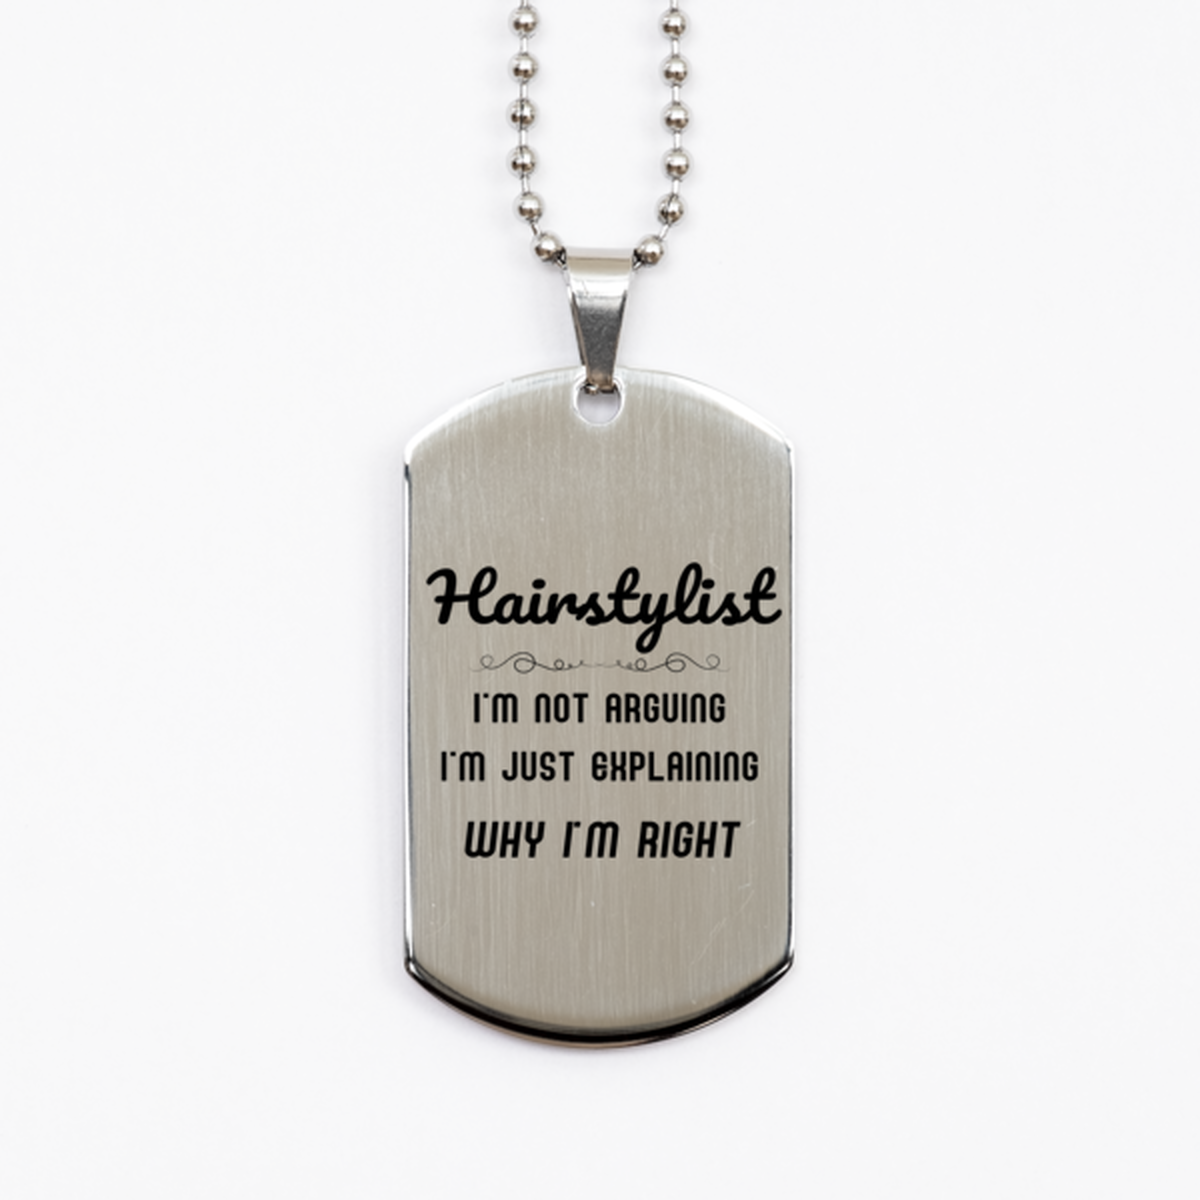 Hairstylist I'm not Arguing. I'm Just Explaining Why I'm RIGHT Silver Dog Tag, Funny Saying Quote Hairstylist Gifts For Hairstylist Graduation Birthday Christmas Gifts for Men Women Coworker